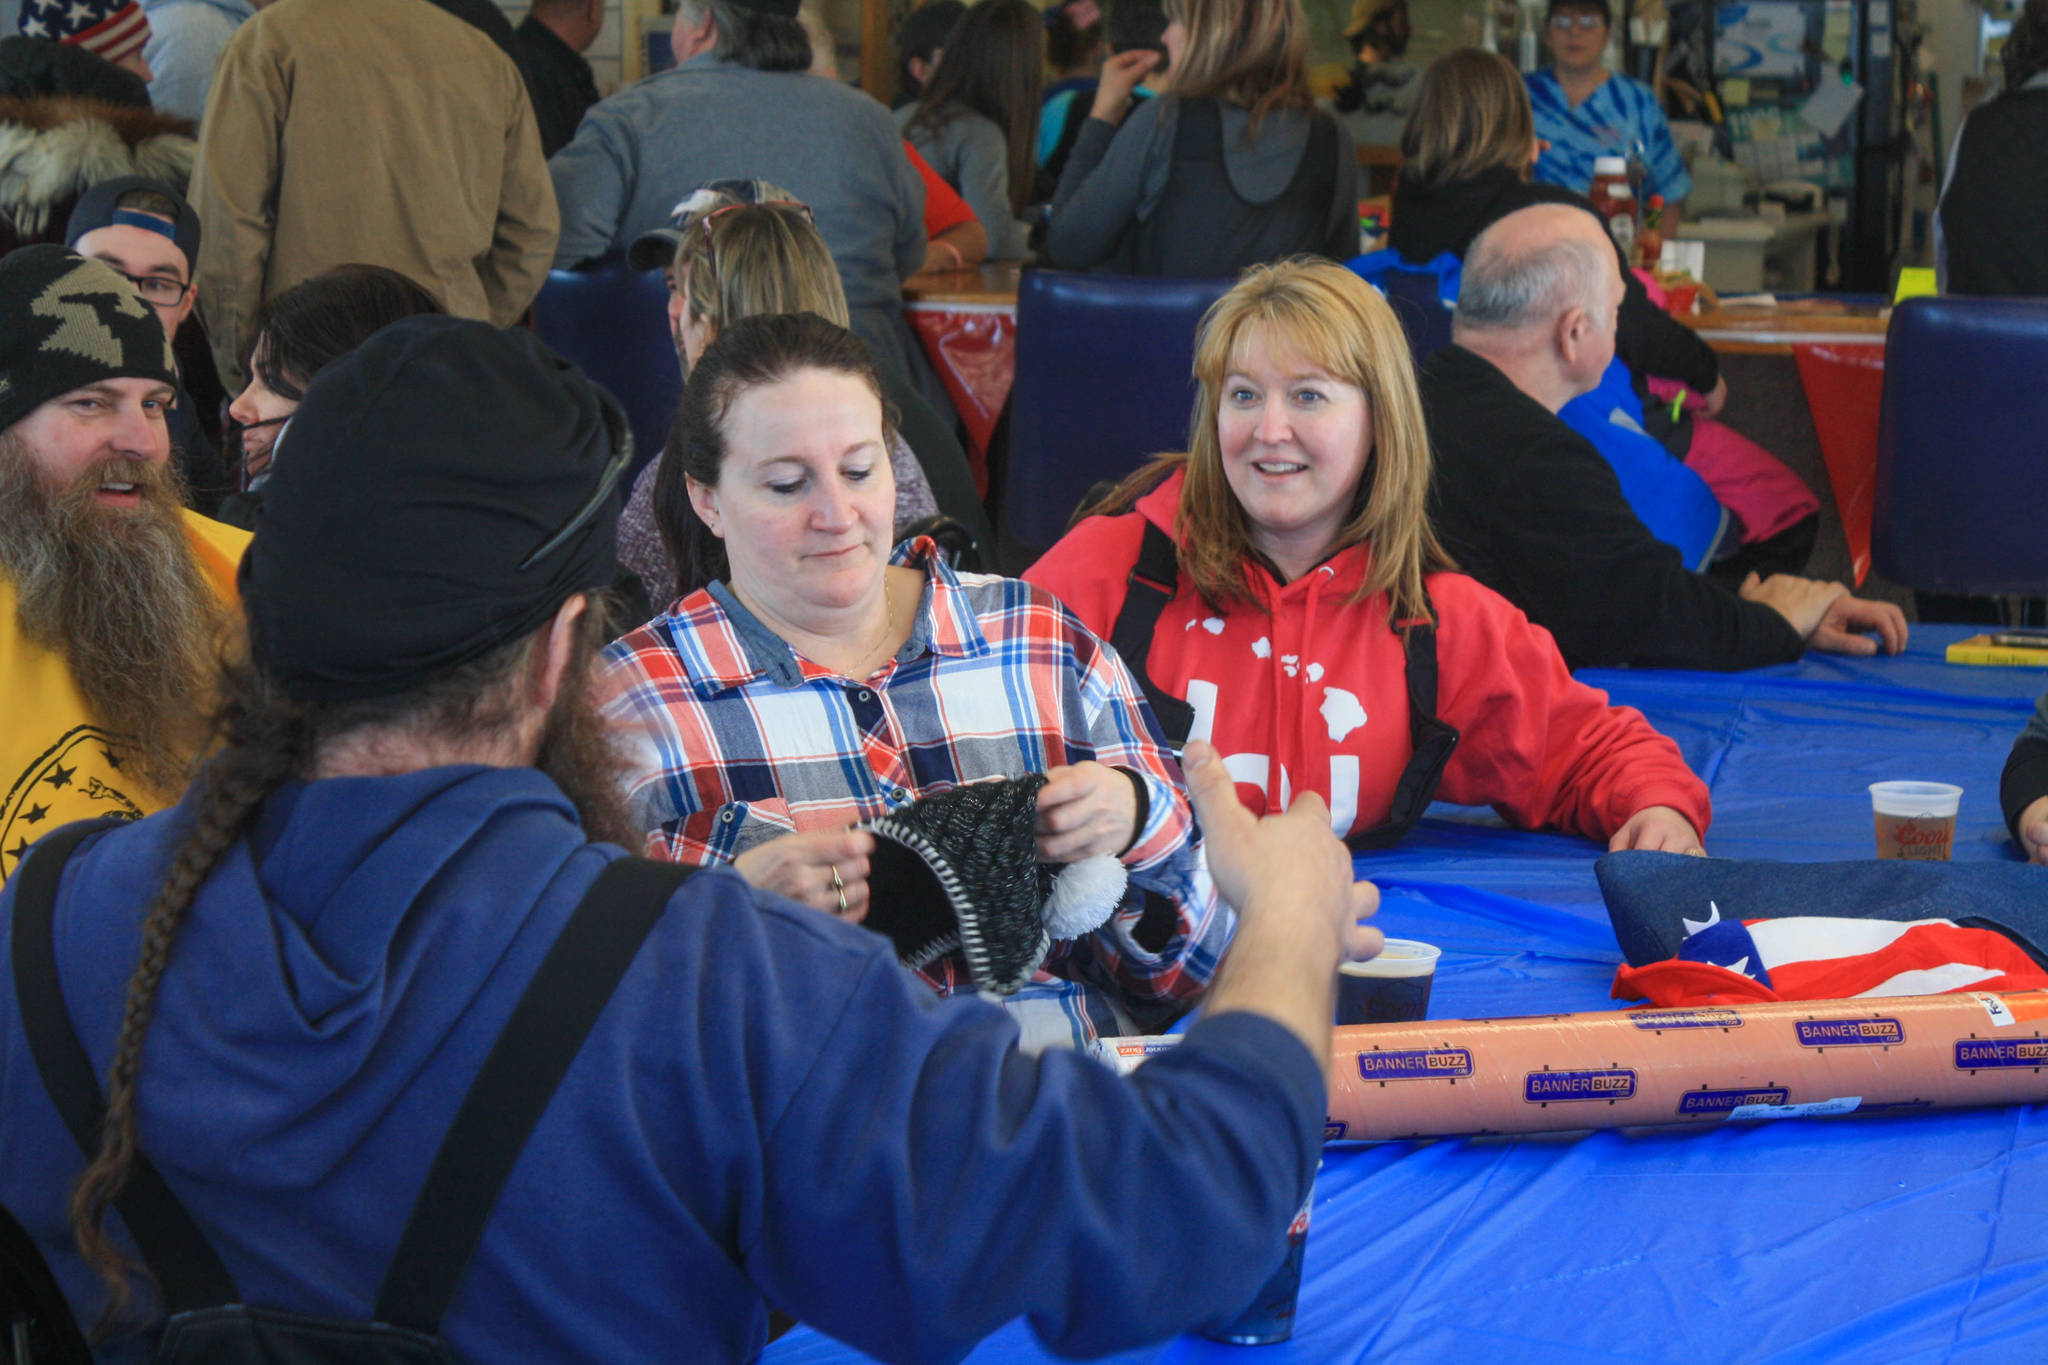 Participants in the Way Our Women Ride fundraiser enjoy food and friends at Freddie’s Roadhouse on Saturday, Feb. 24, 2017 near Ninilchik, Alaska. (Photo by Erin Thompson/Peninsula Clarion)